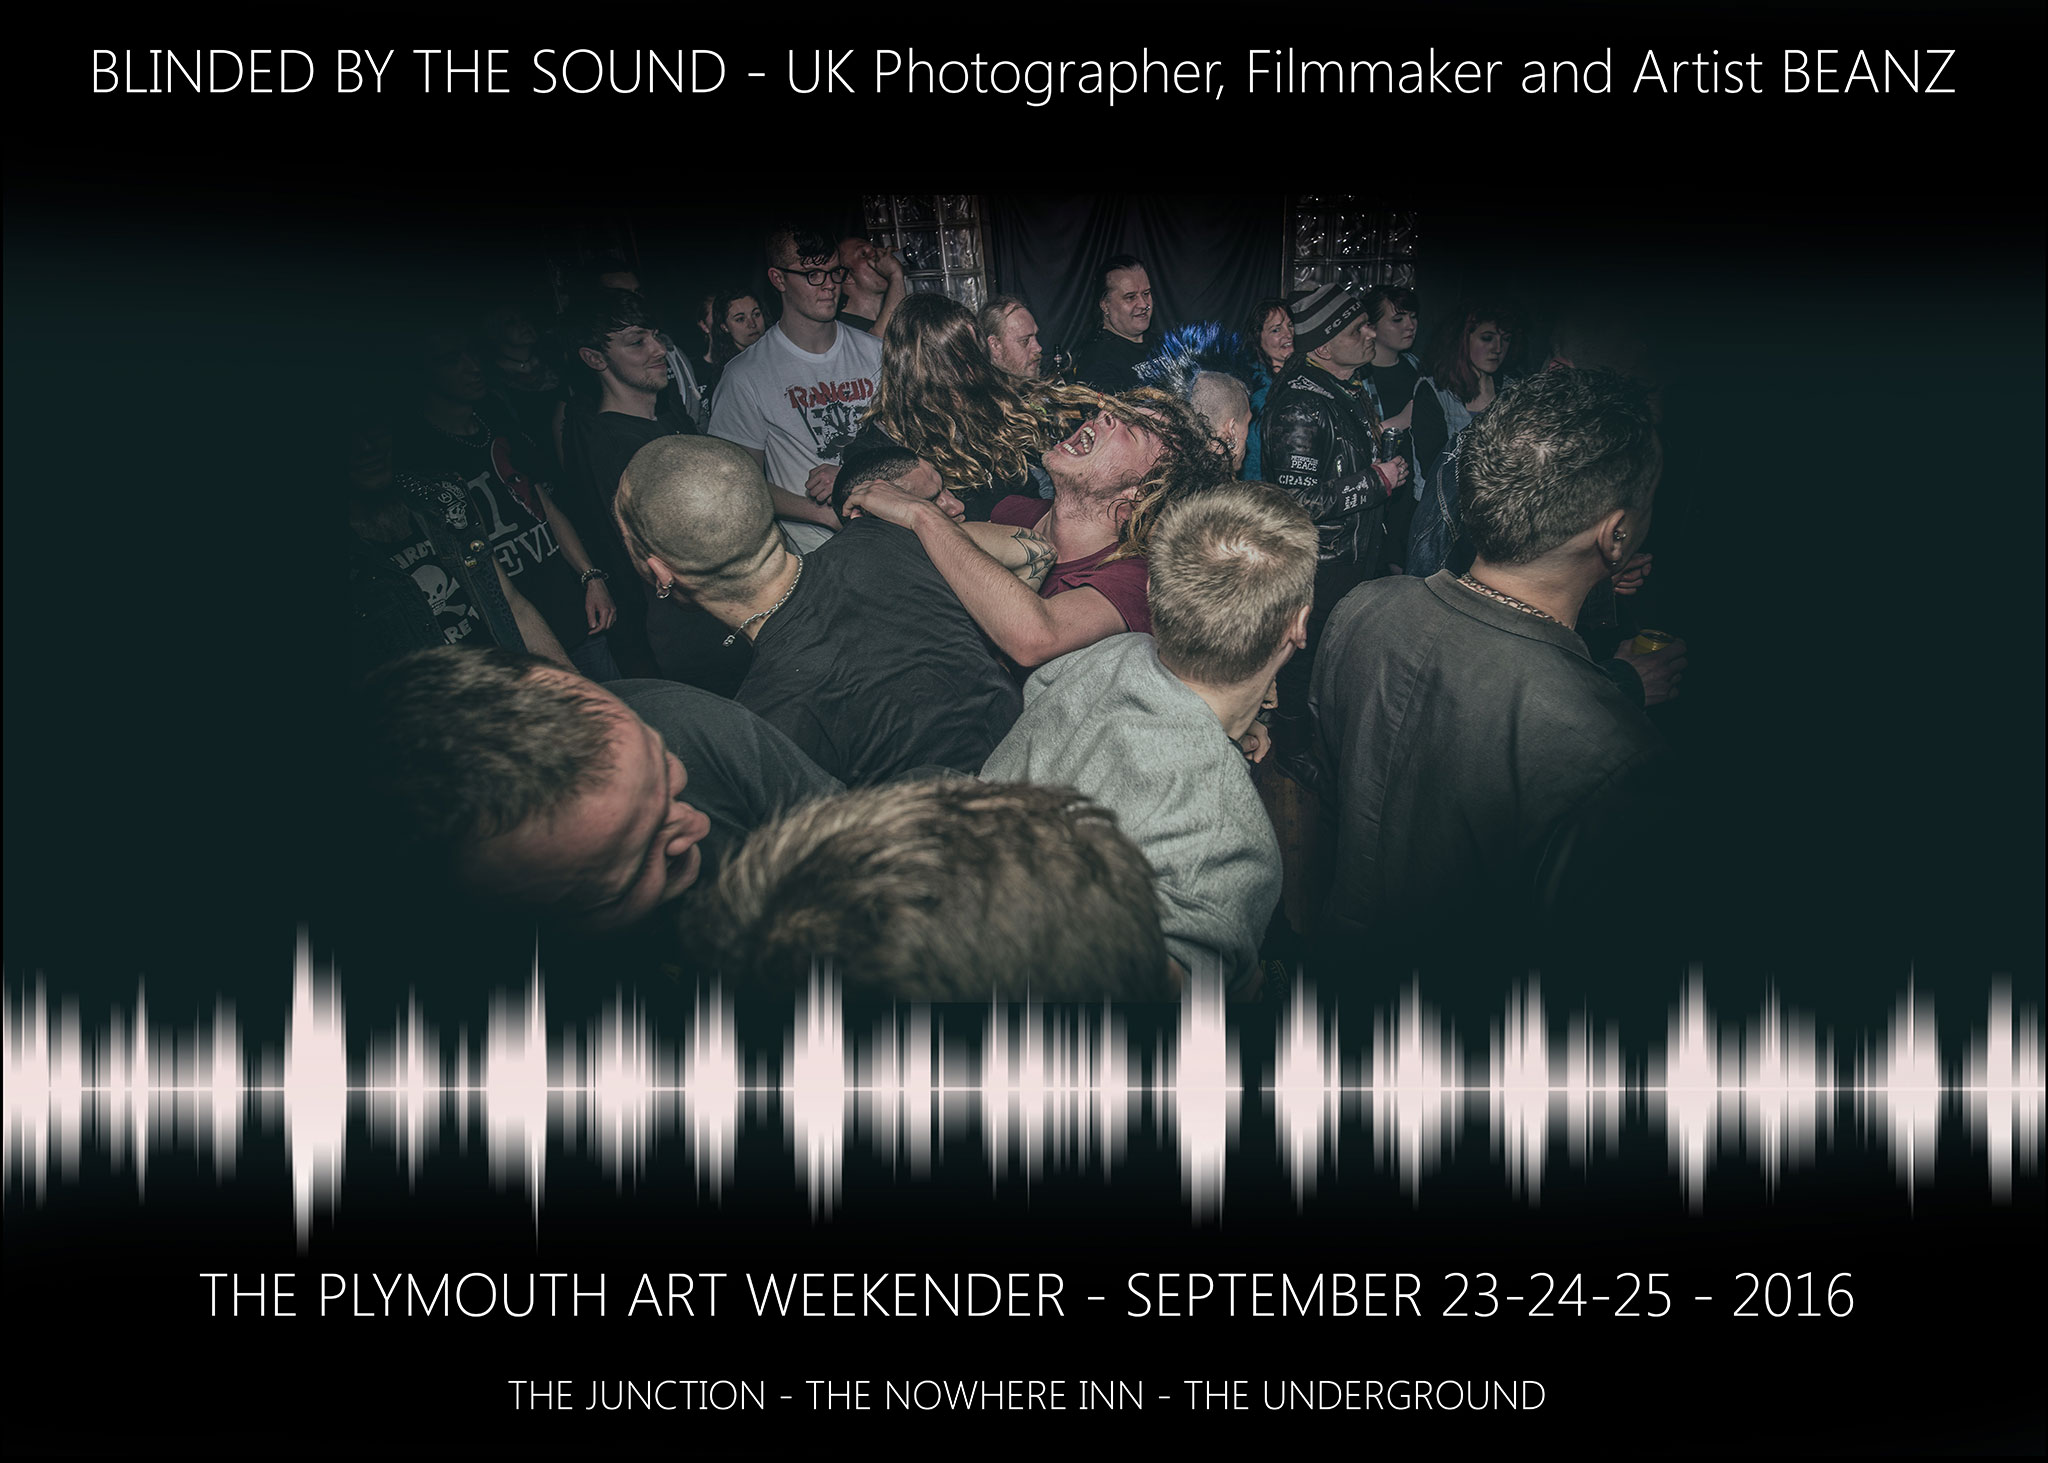 Action Photograph of Passionate Music fans in Plymouth at Underground Venue during a gig